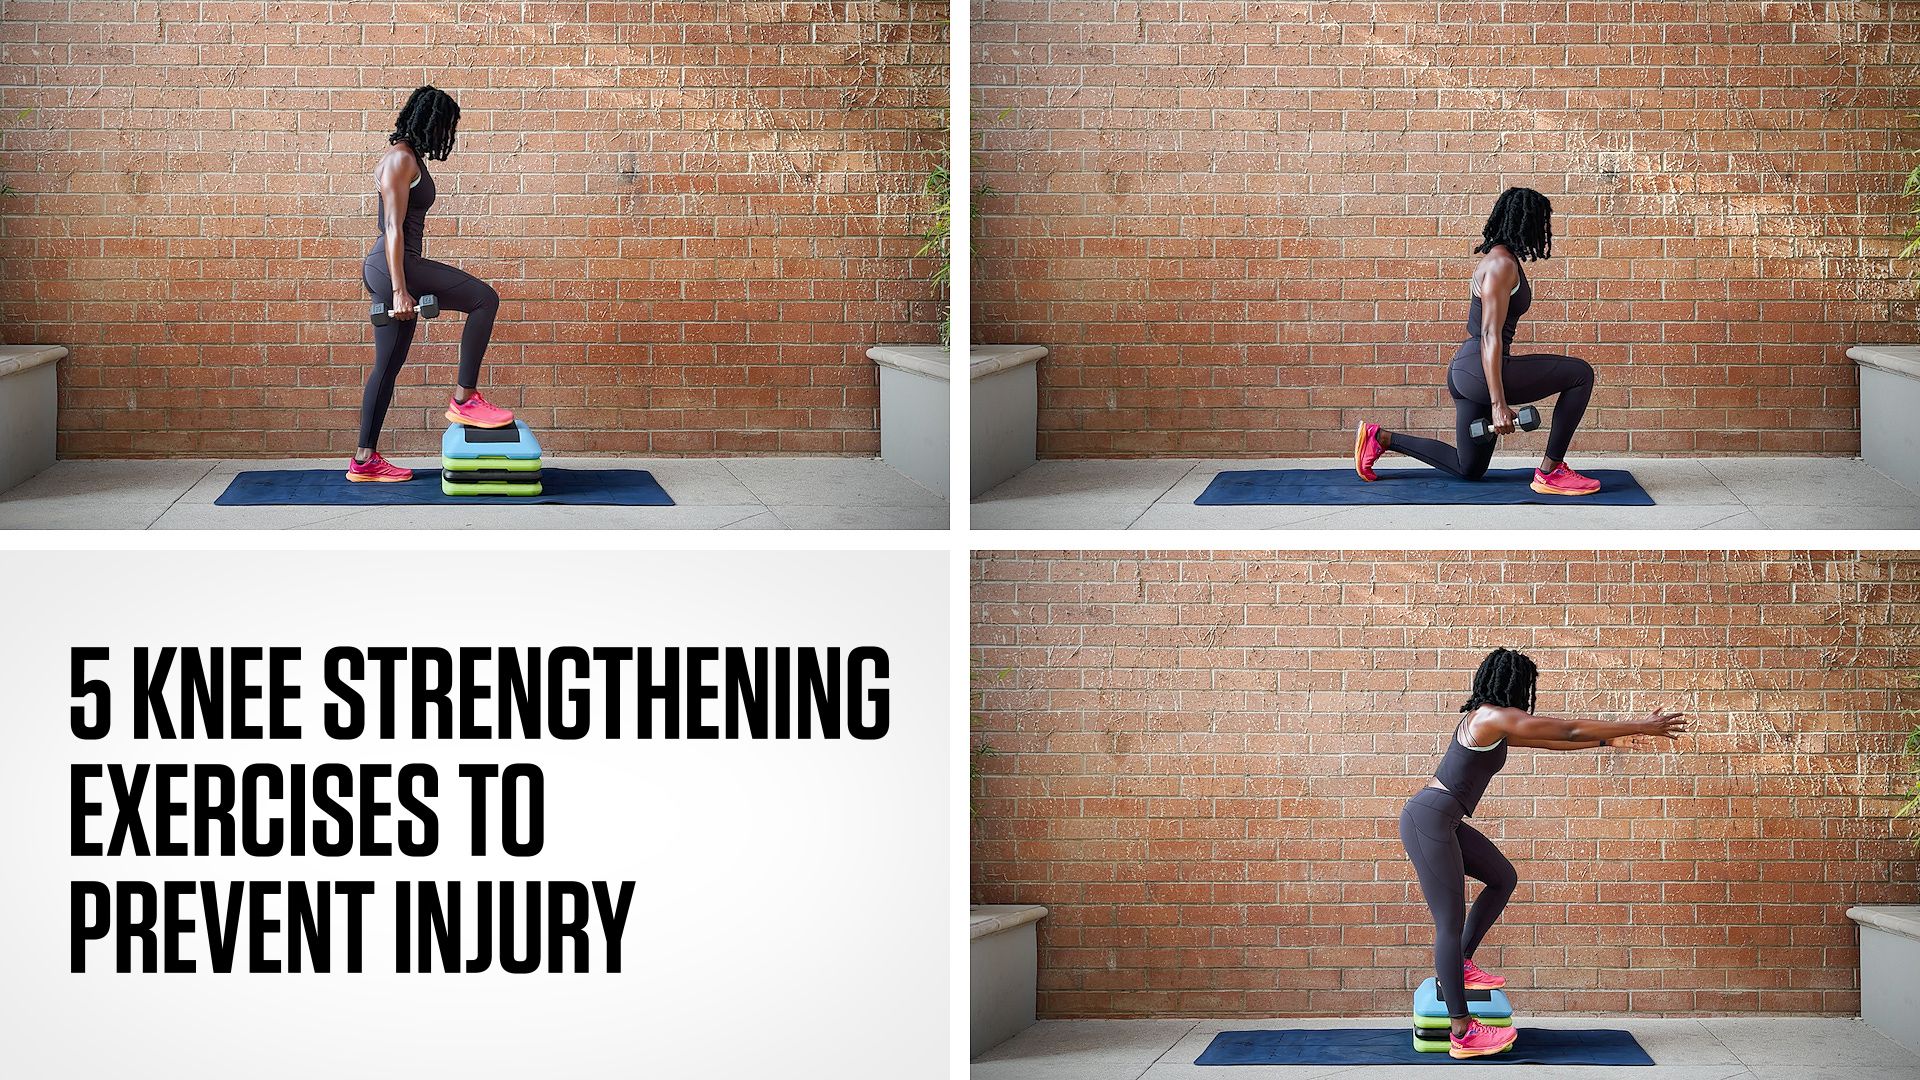 Leg Exercises for Bad Knees: Stretch and Strengthen